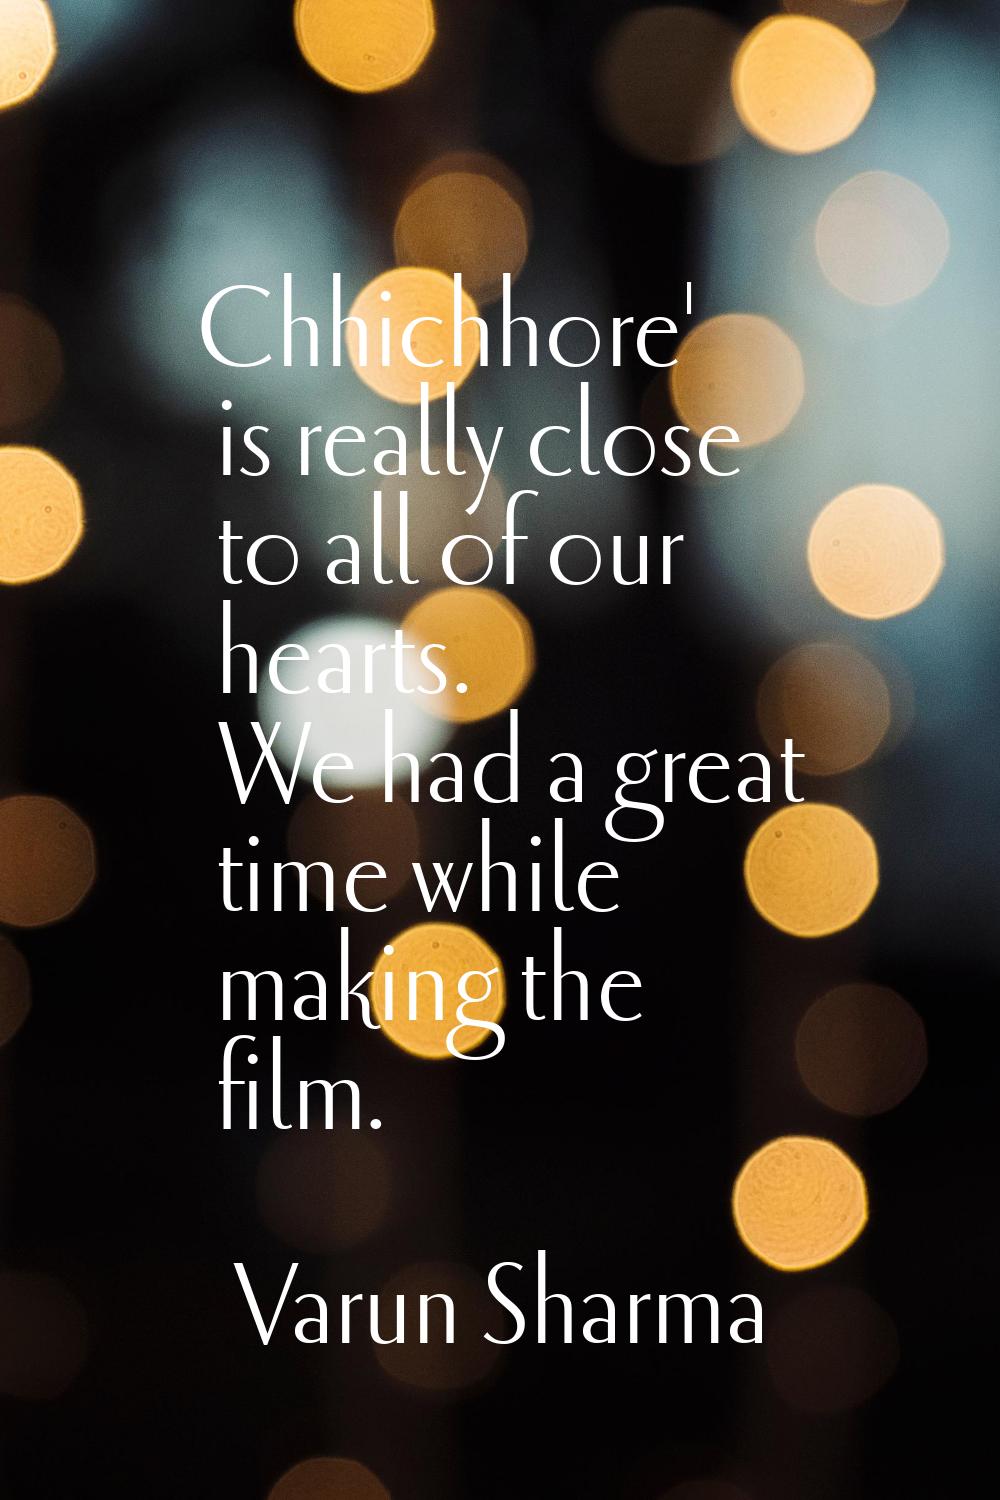 Chhichhore' is really close to all of our hearts. We had a great time while making the film.